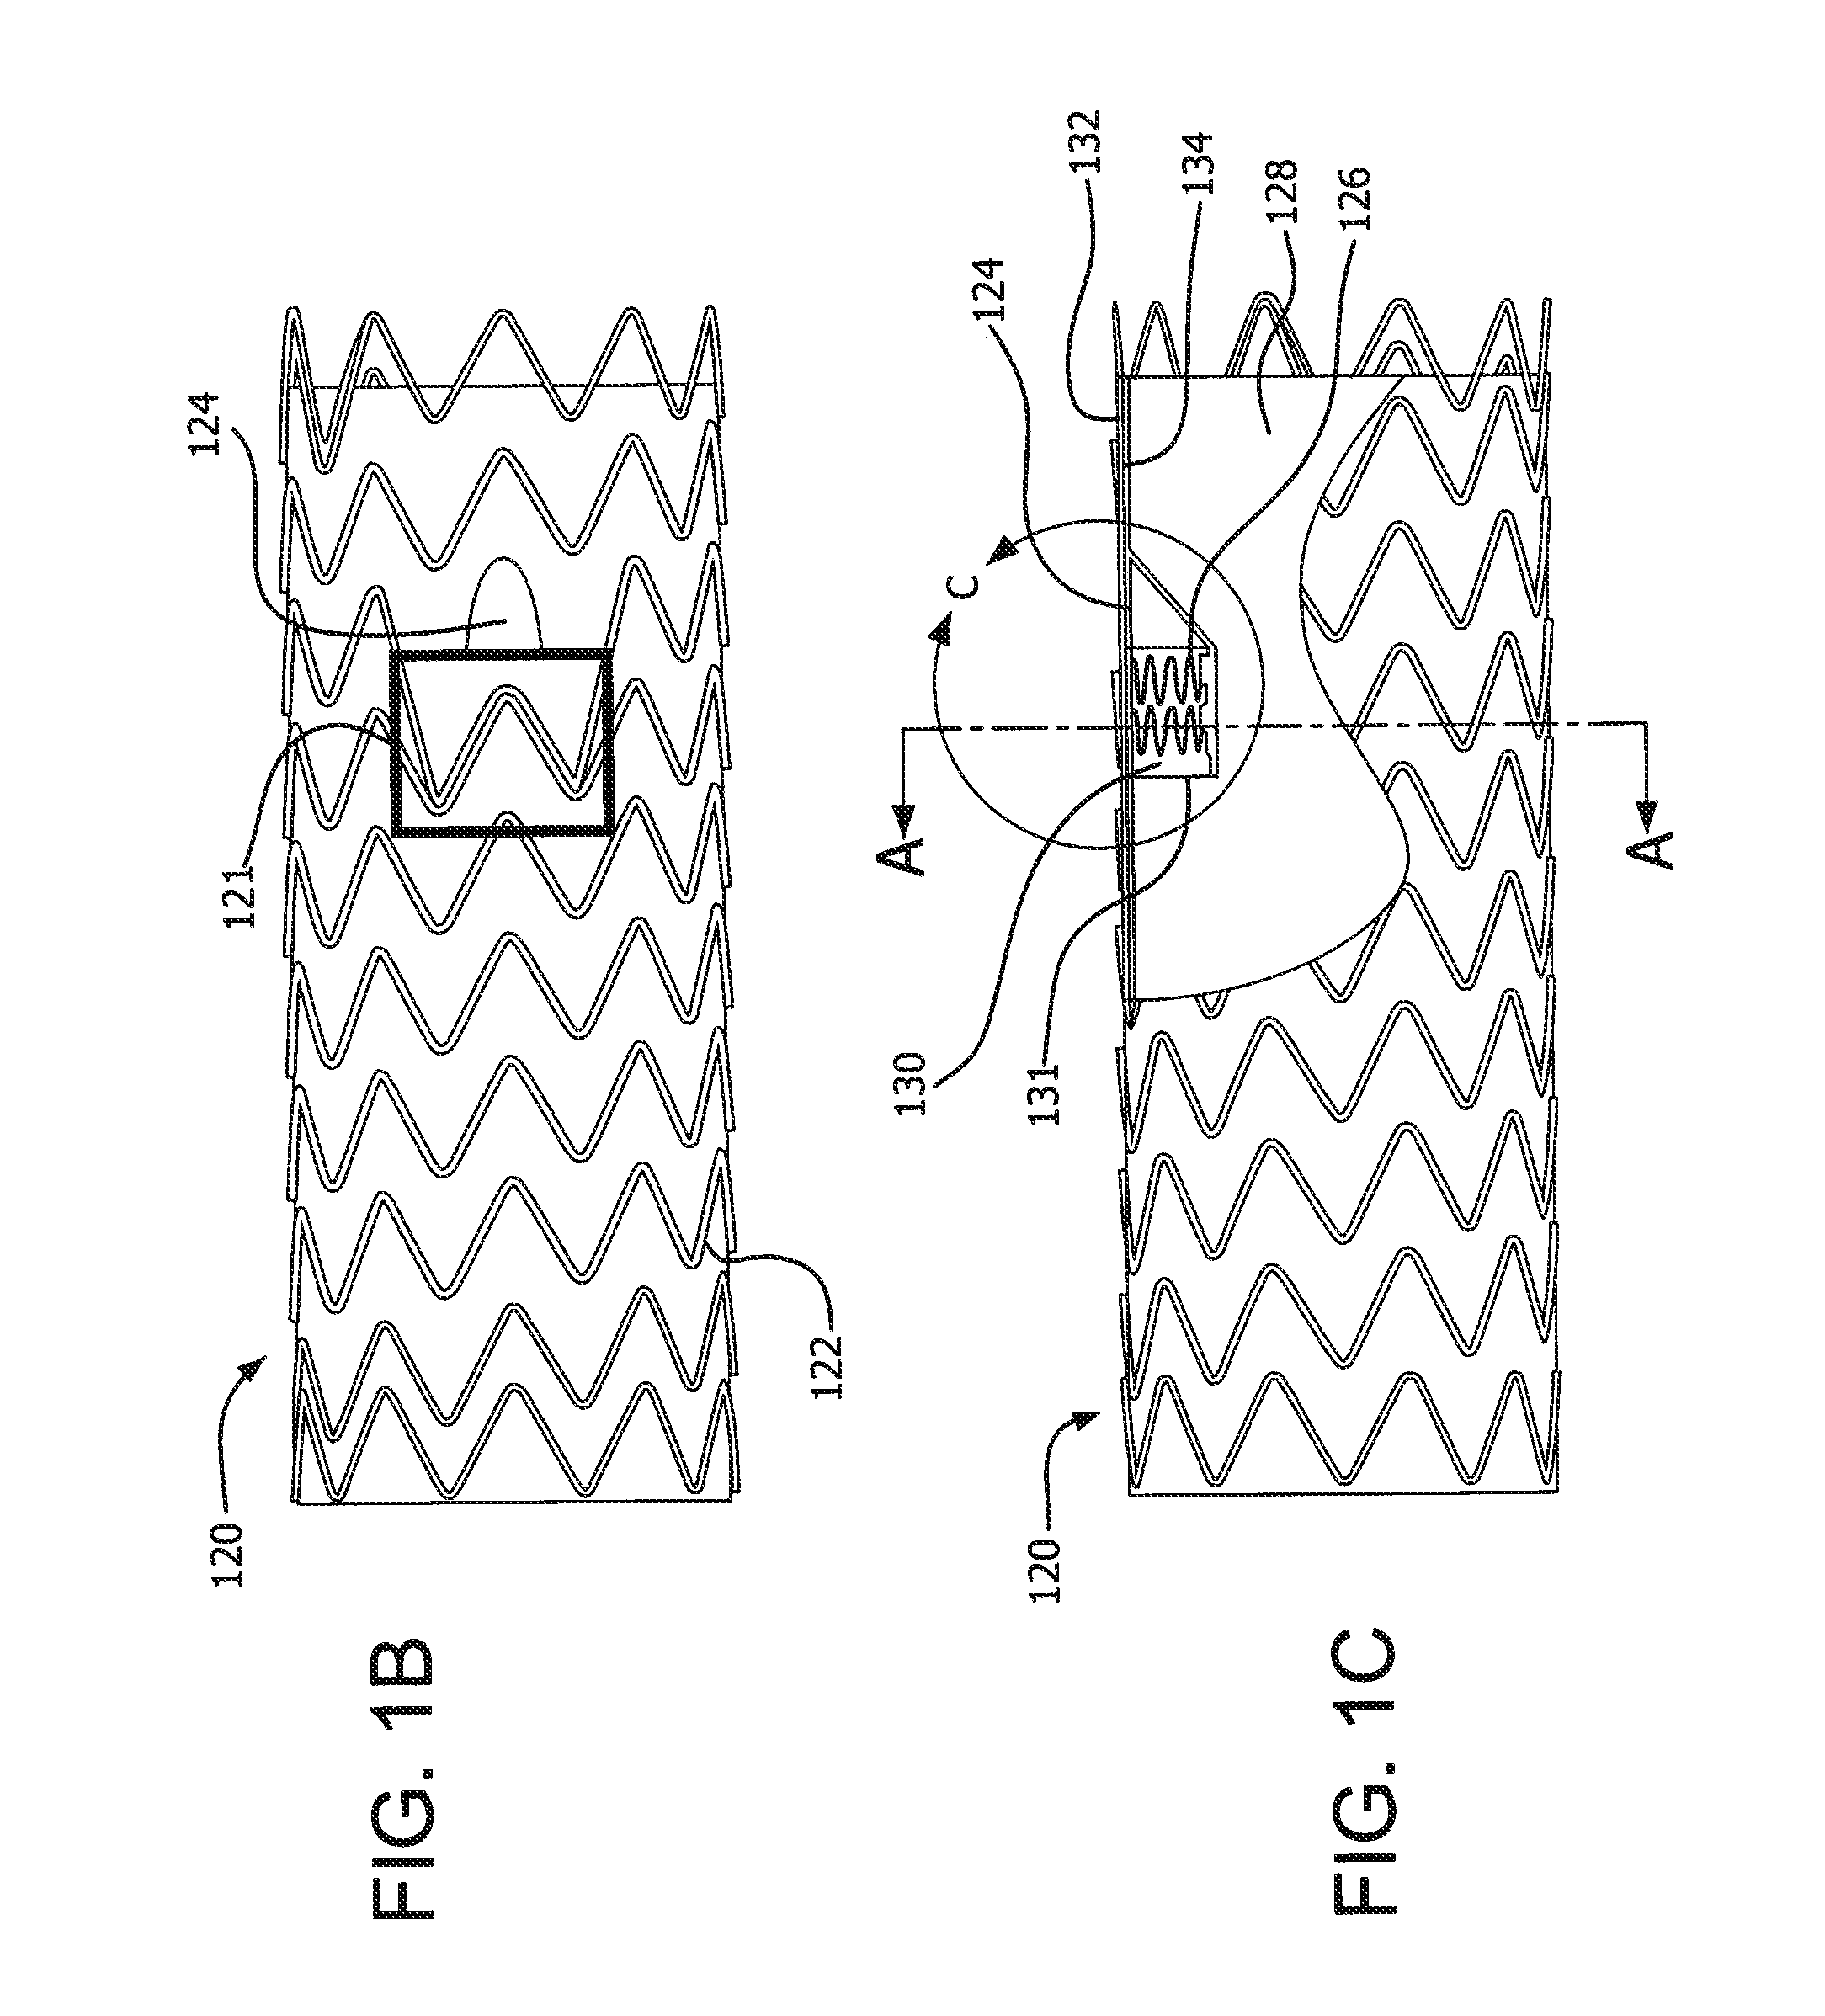 Bifurcated highly conformable medical device branch access